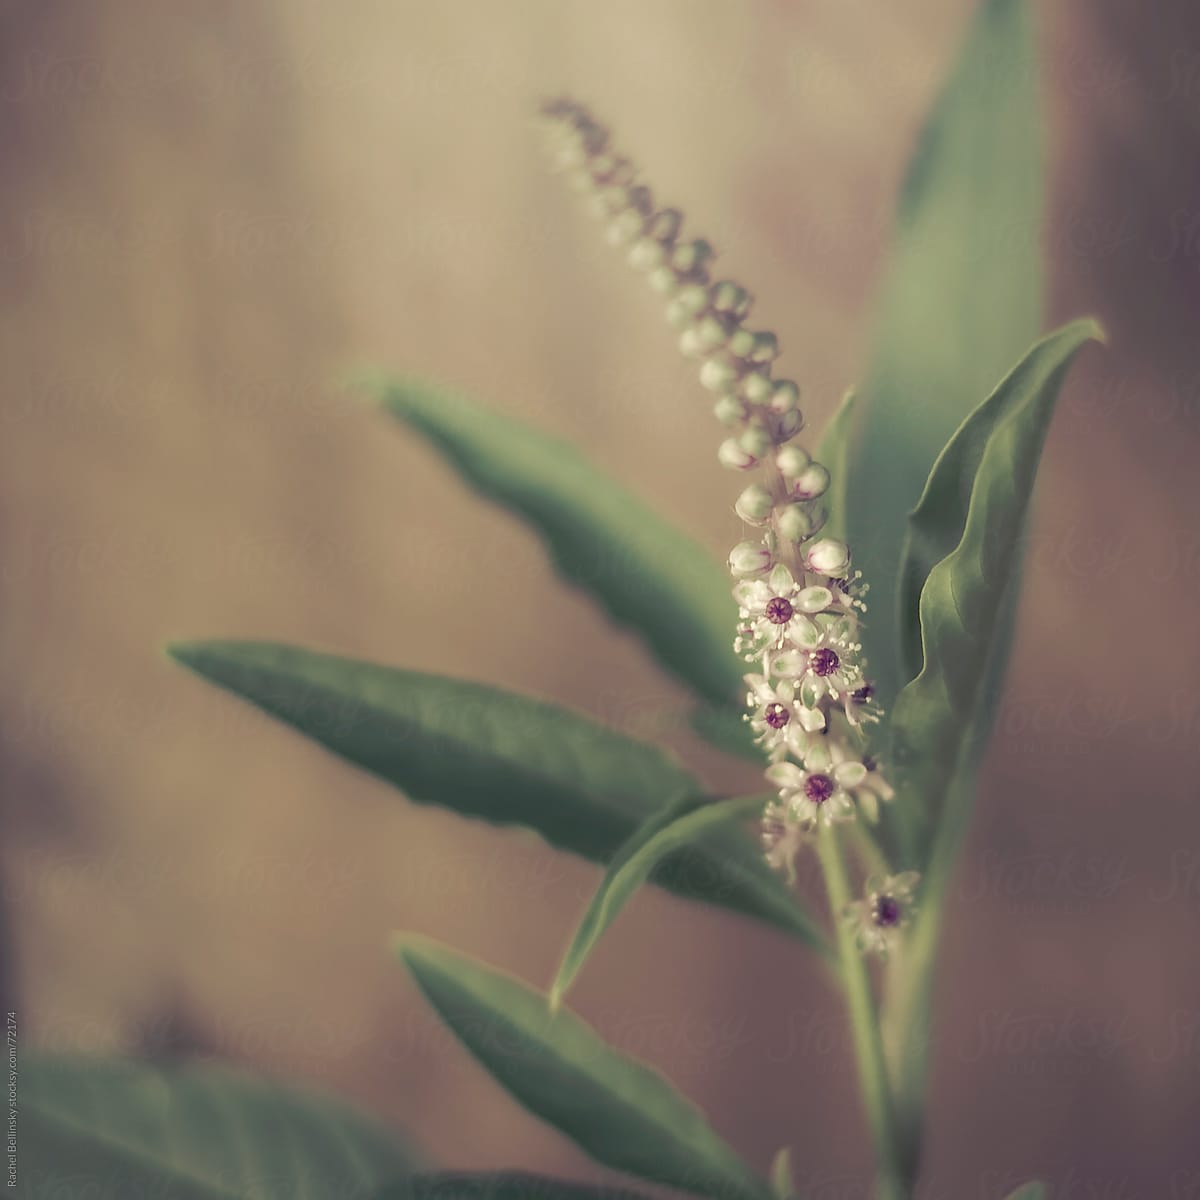 Green stalk with small white flowers